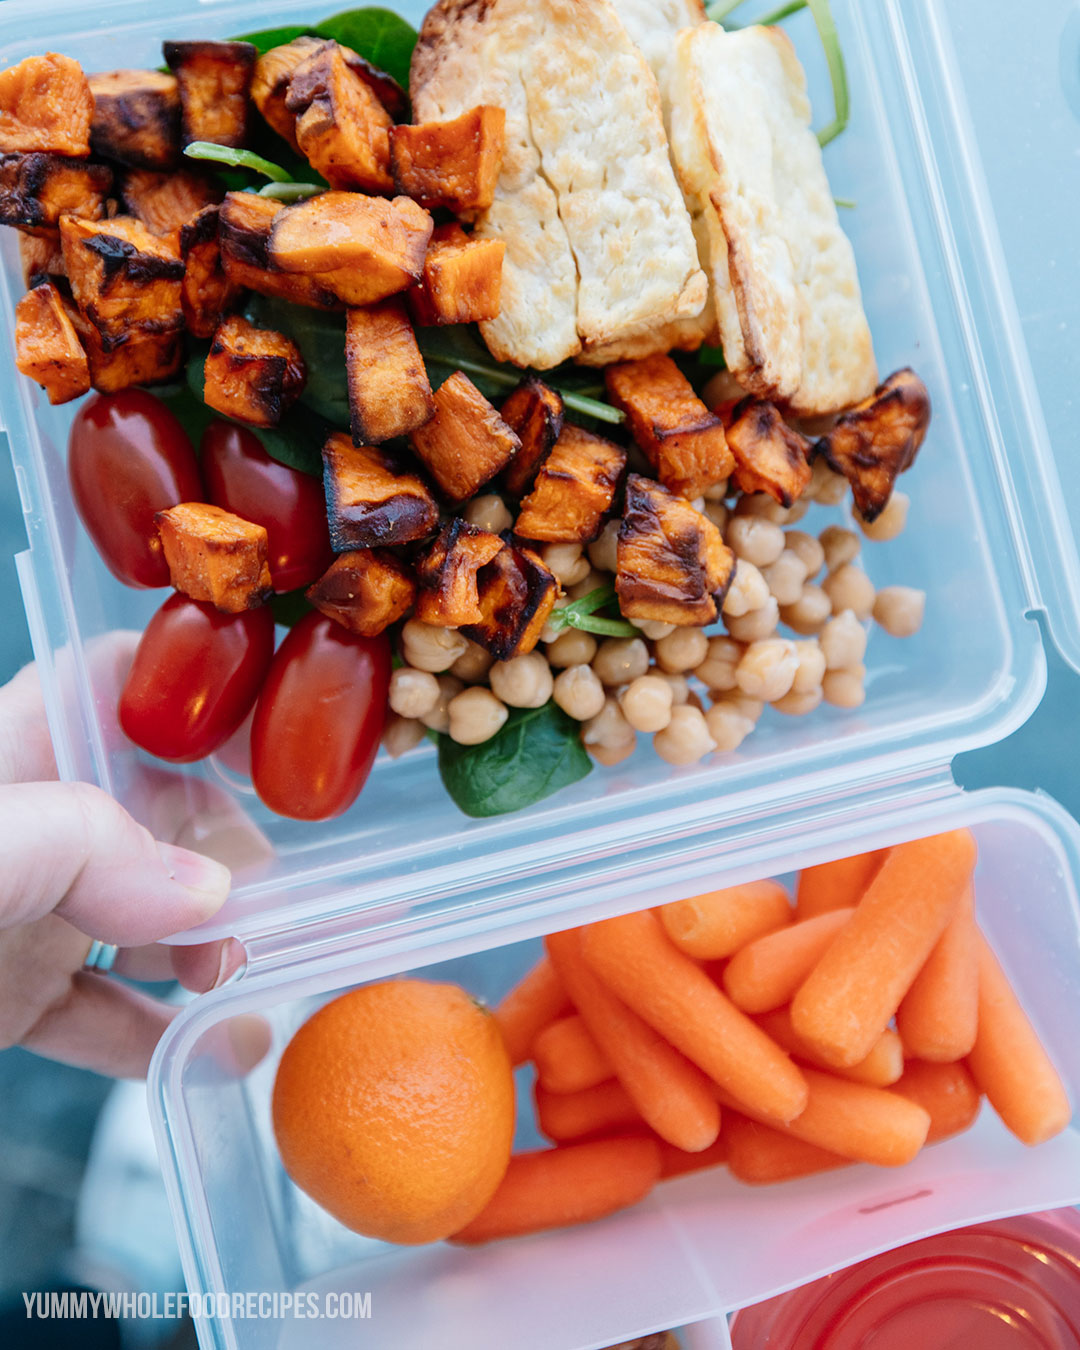 https://yummywholefoodrecipes.com/wp-content/uploads/2023/01/Gina-Livy-Healthy-Snack-and-Lunch-Box-to-Go-4.jpg